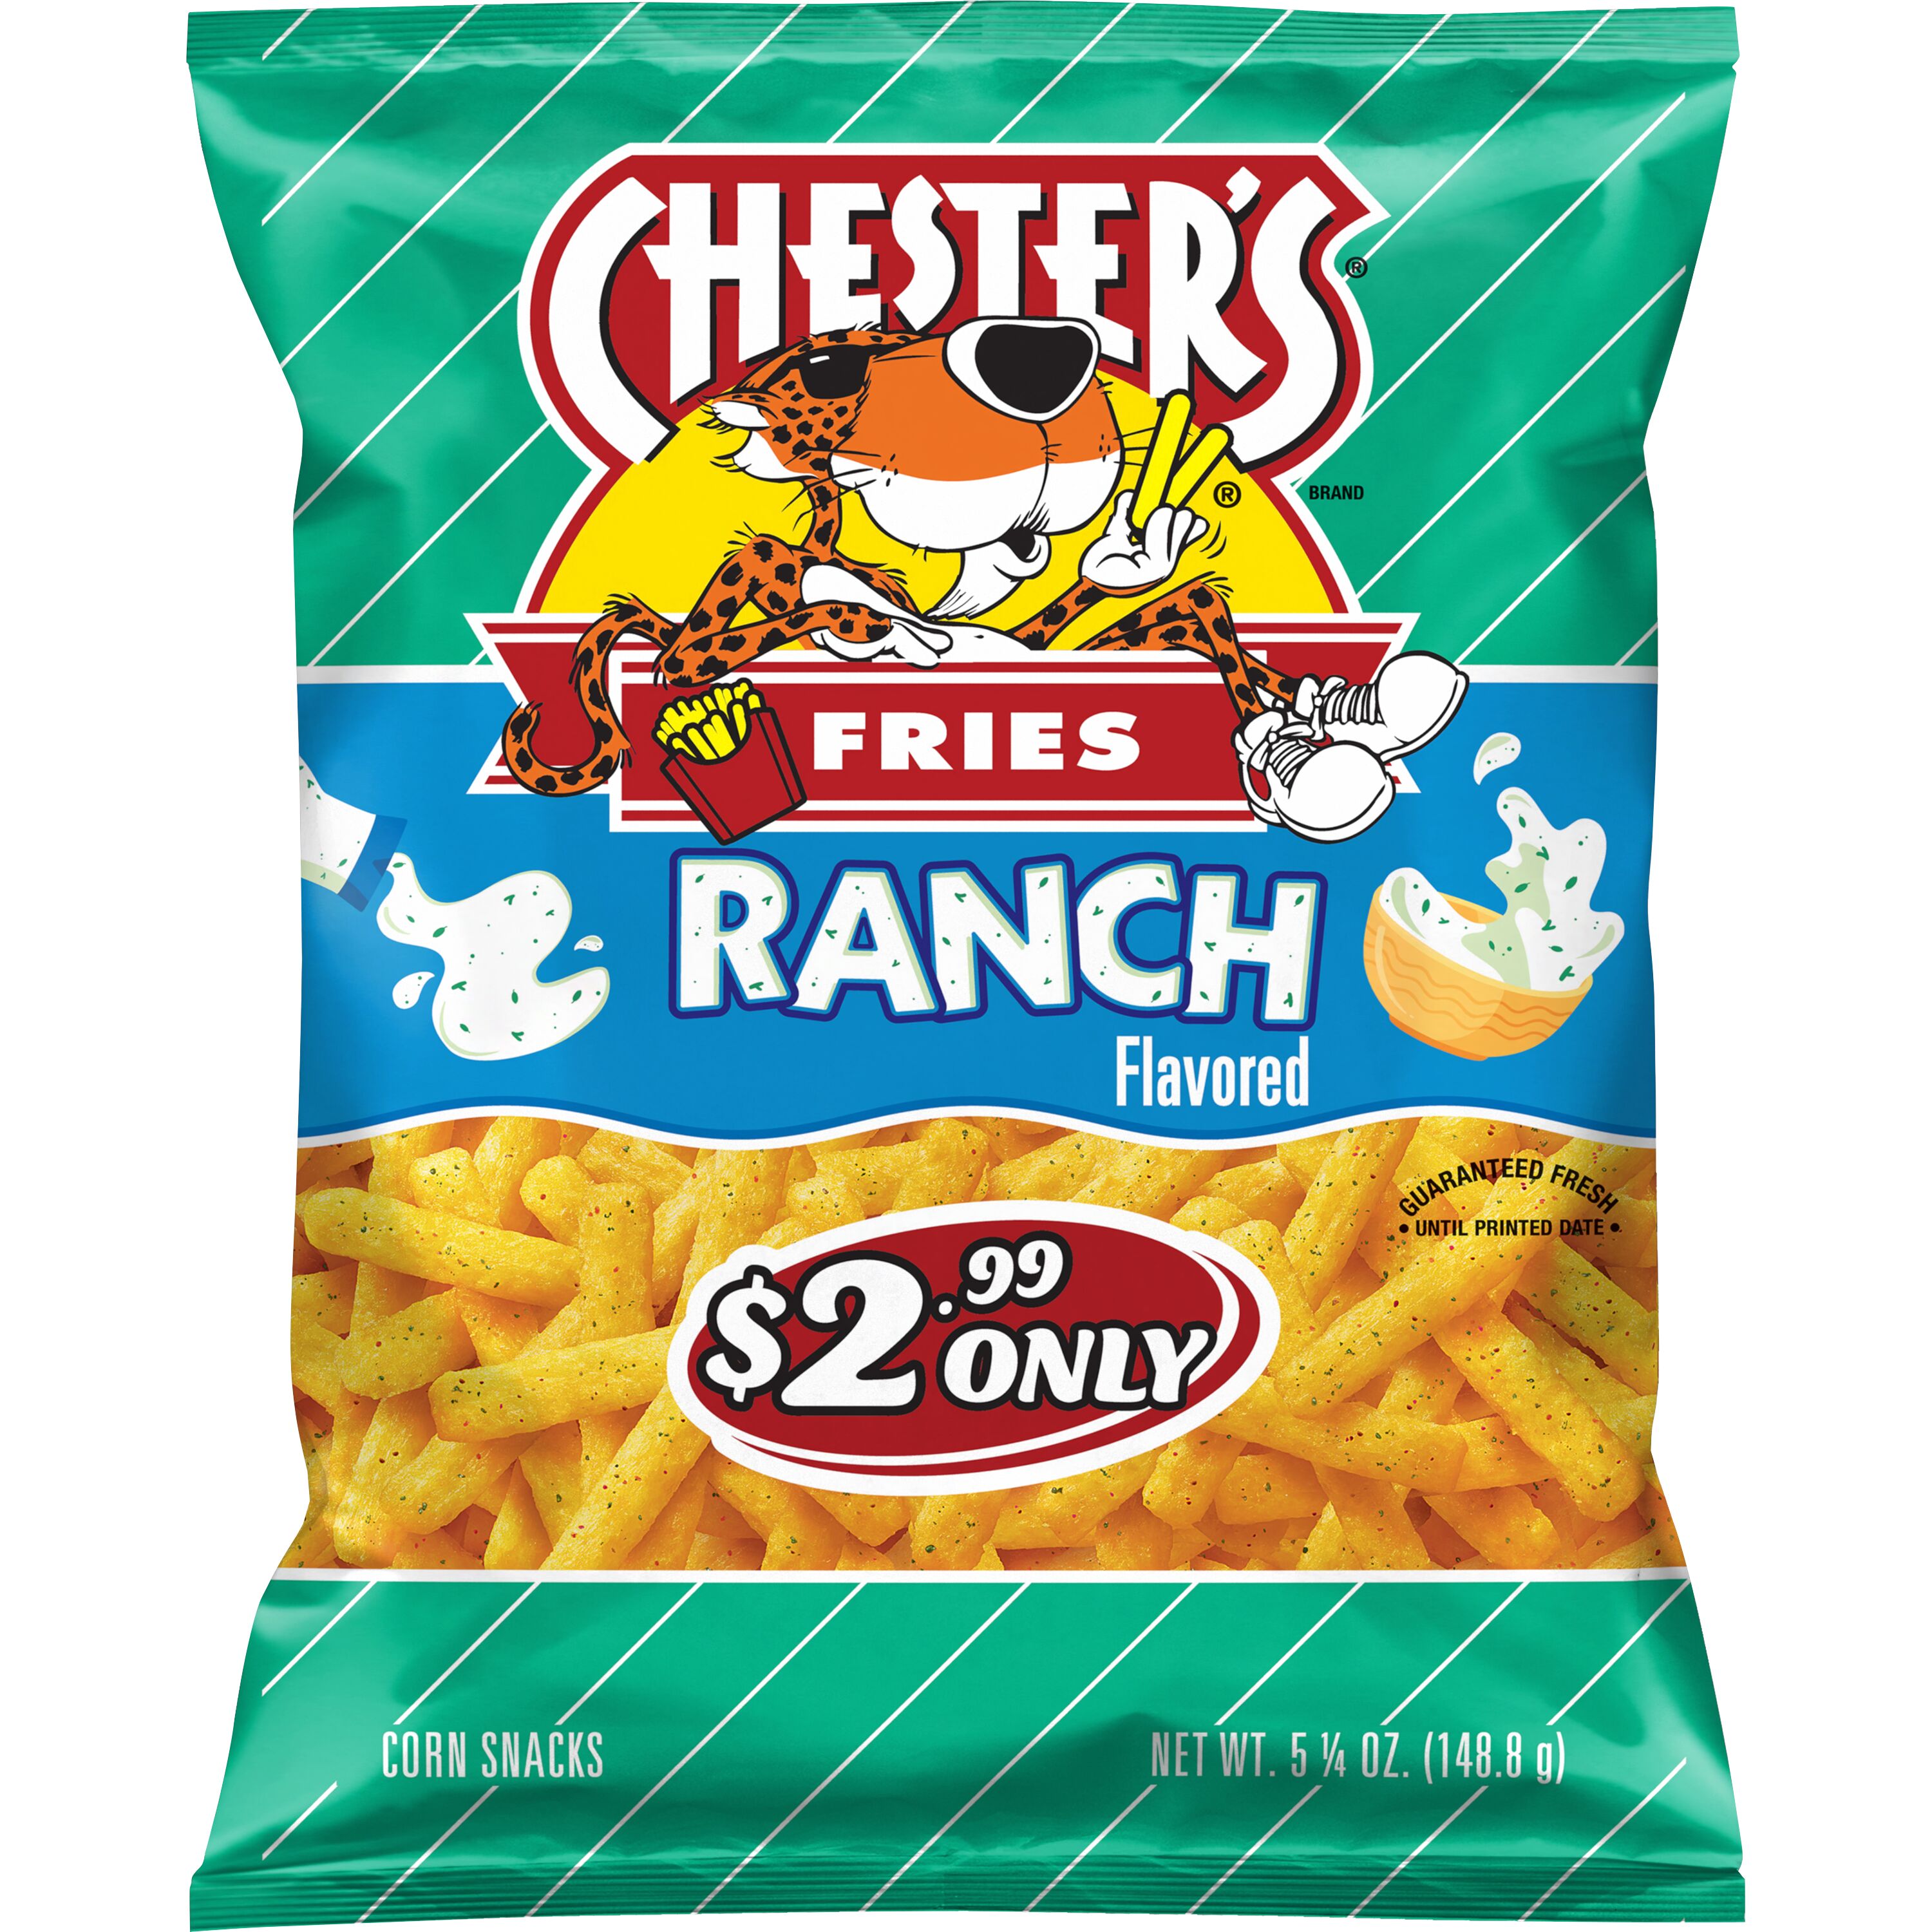 Chester's® Ranch Fries Flavored Corn and Potato Snacks 000000000300040443_EA